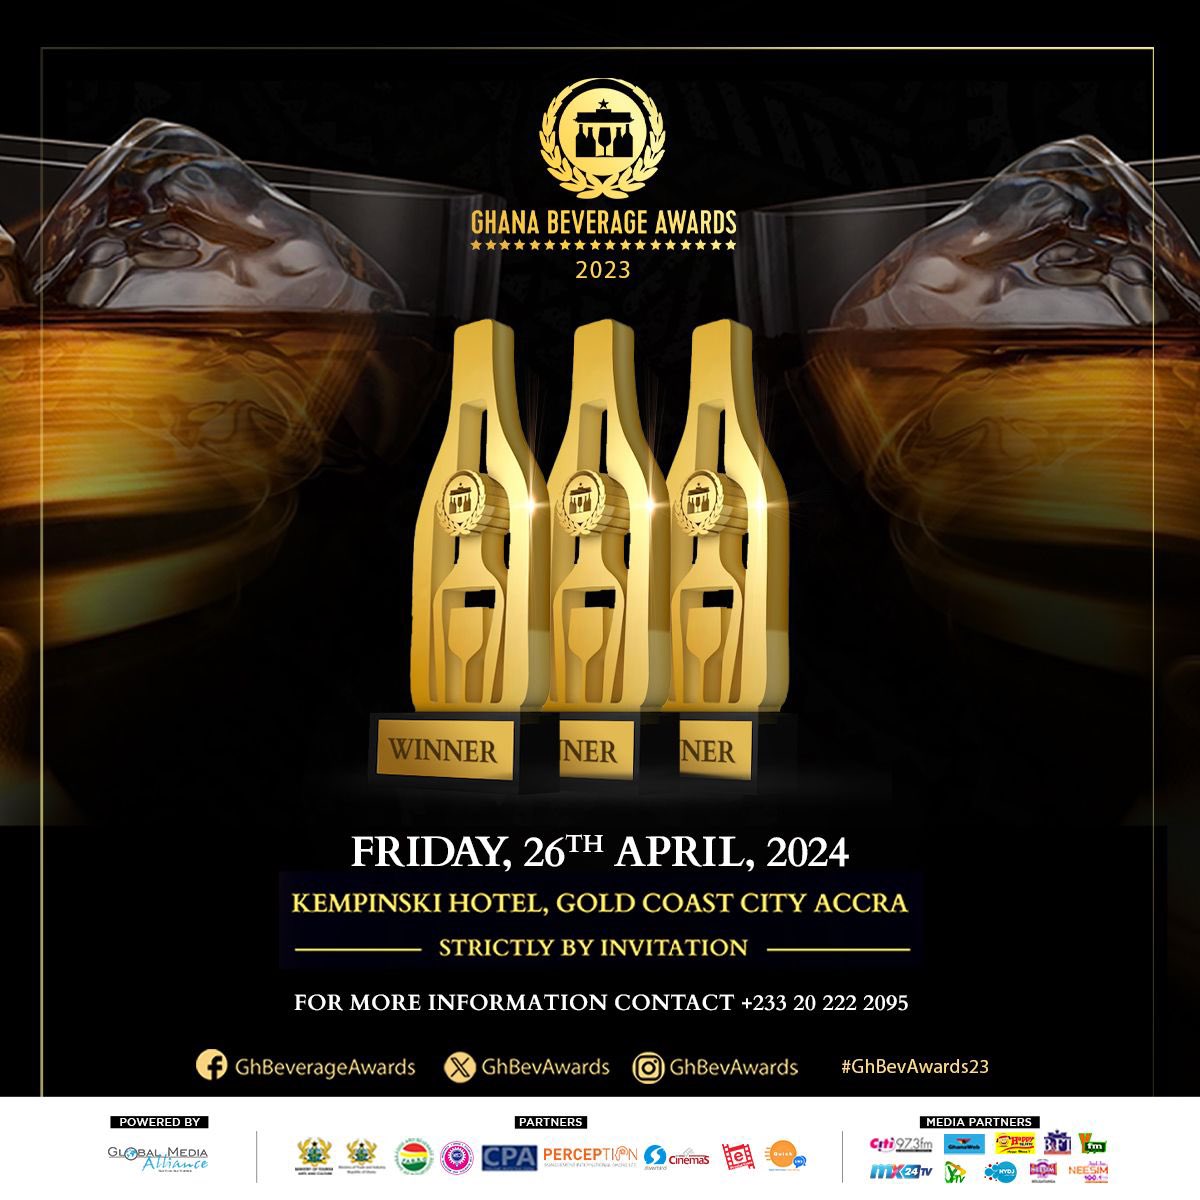 Kasapreko for alcoholic brand of the year, dem fi win am ??  #GhBevAwards23